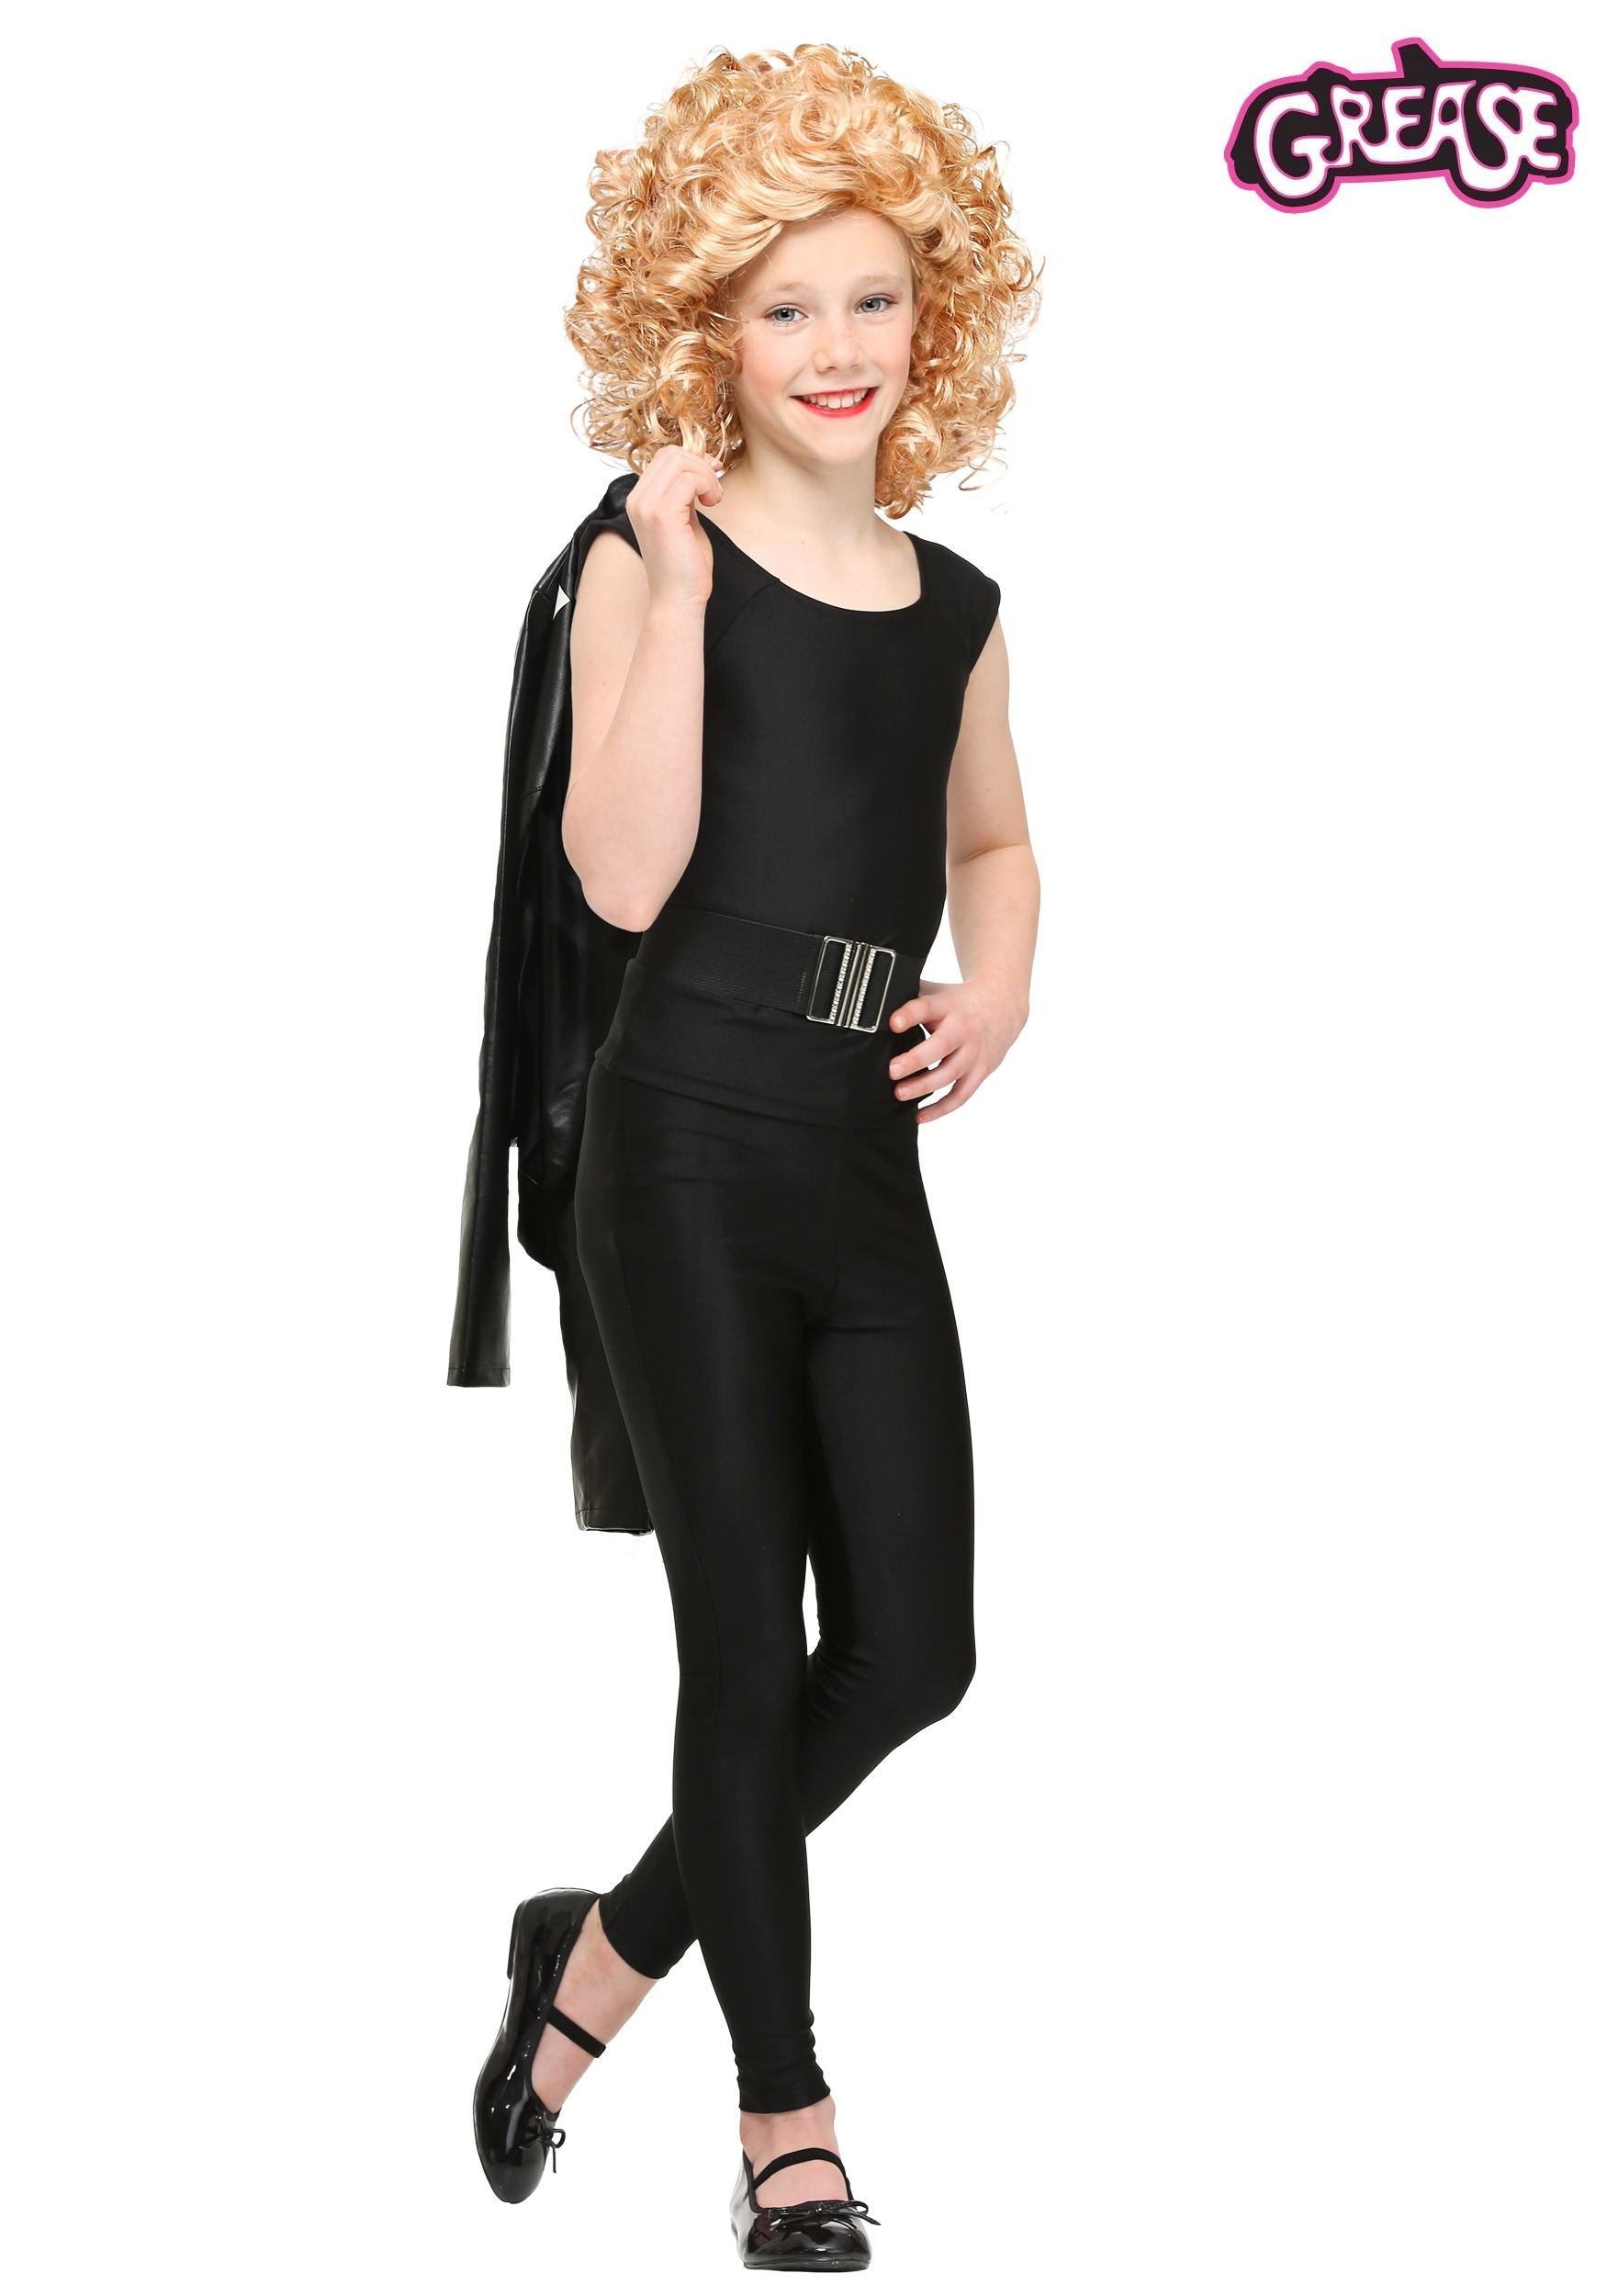 Grease Sandy Costume for Girls1750 x 2500